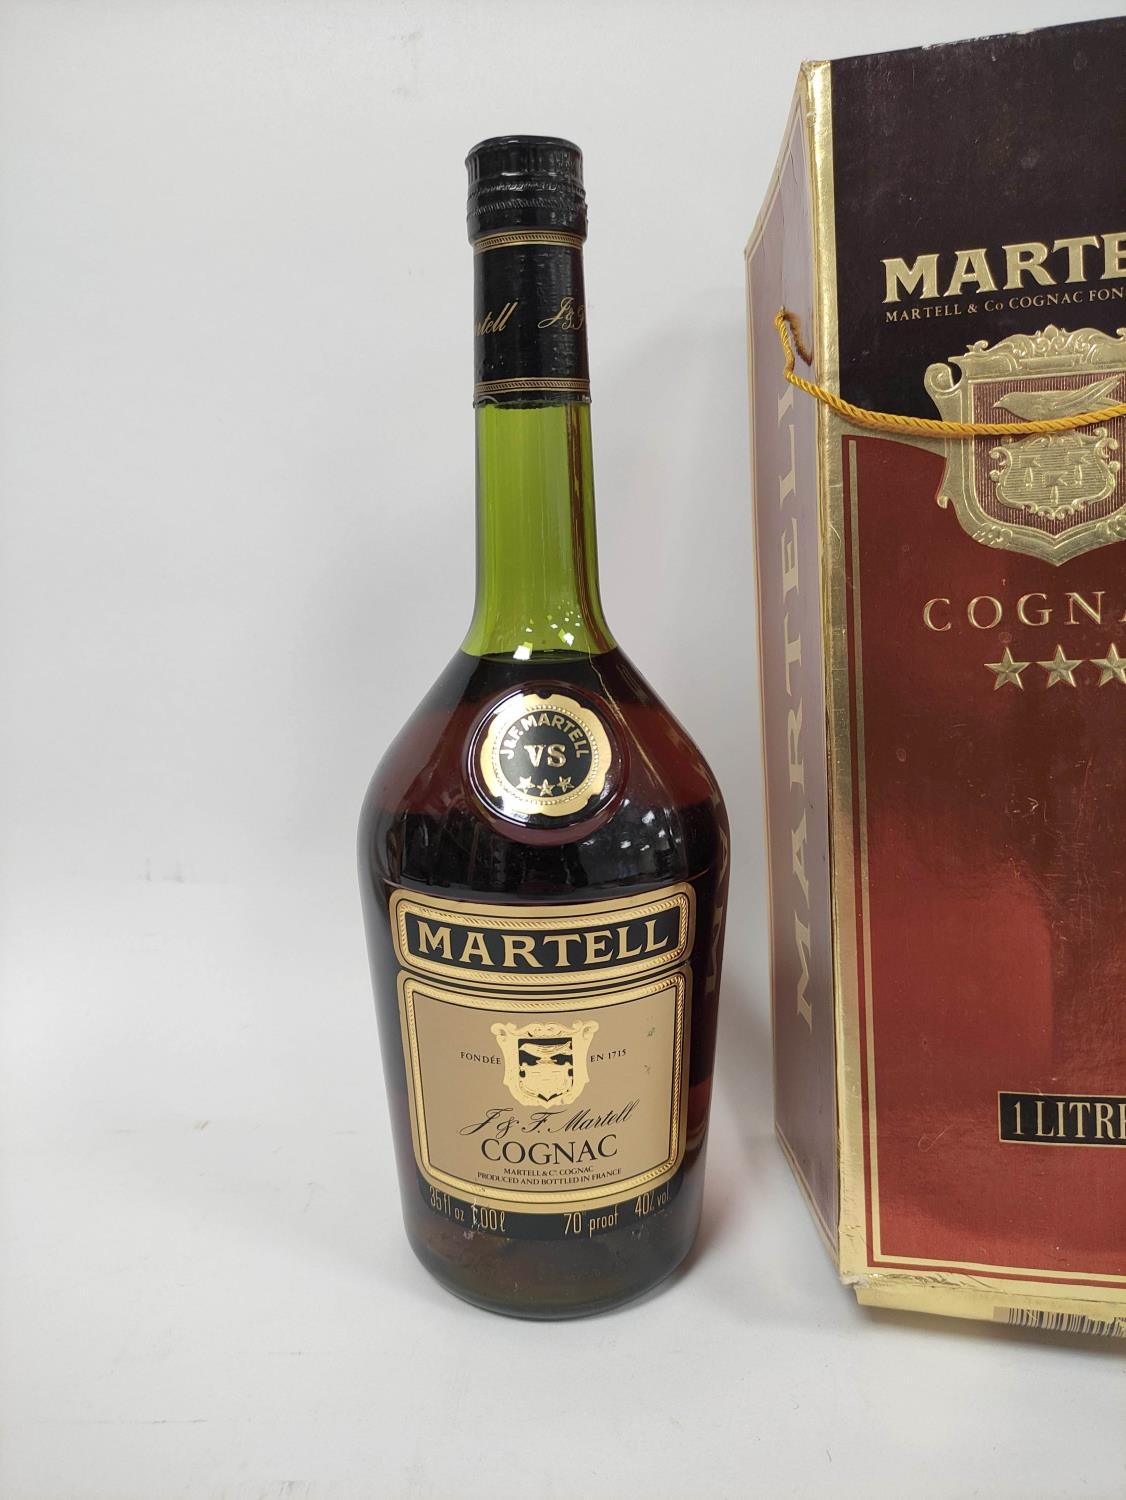 Martell cognac, Bottled circa 1970s, 70 proof, 35 fl oz, 40% vol, with box - Image 2 of 5